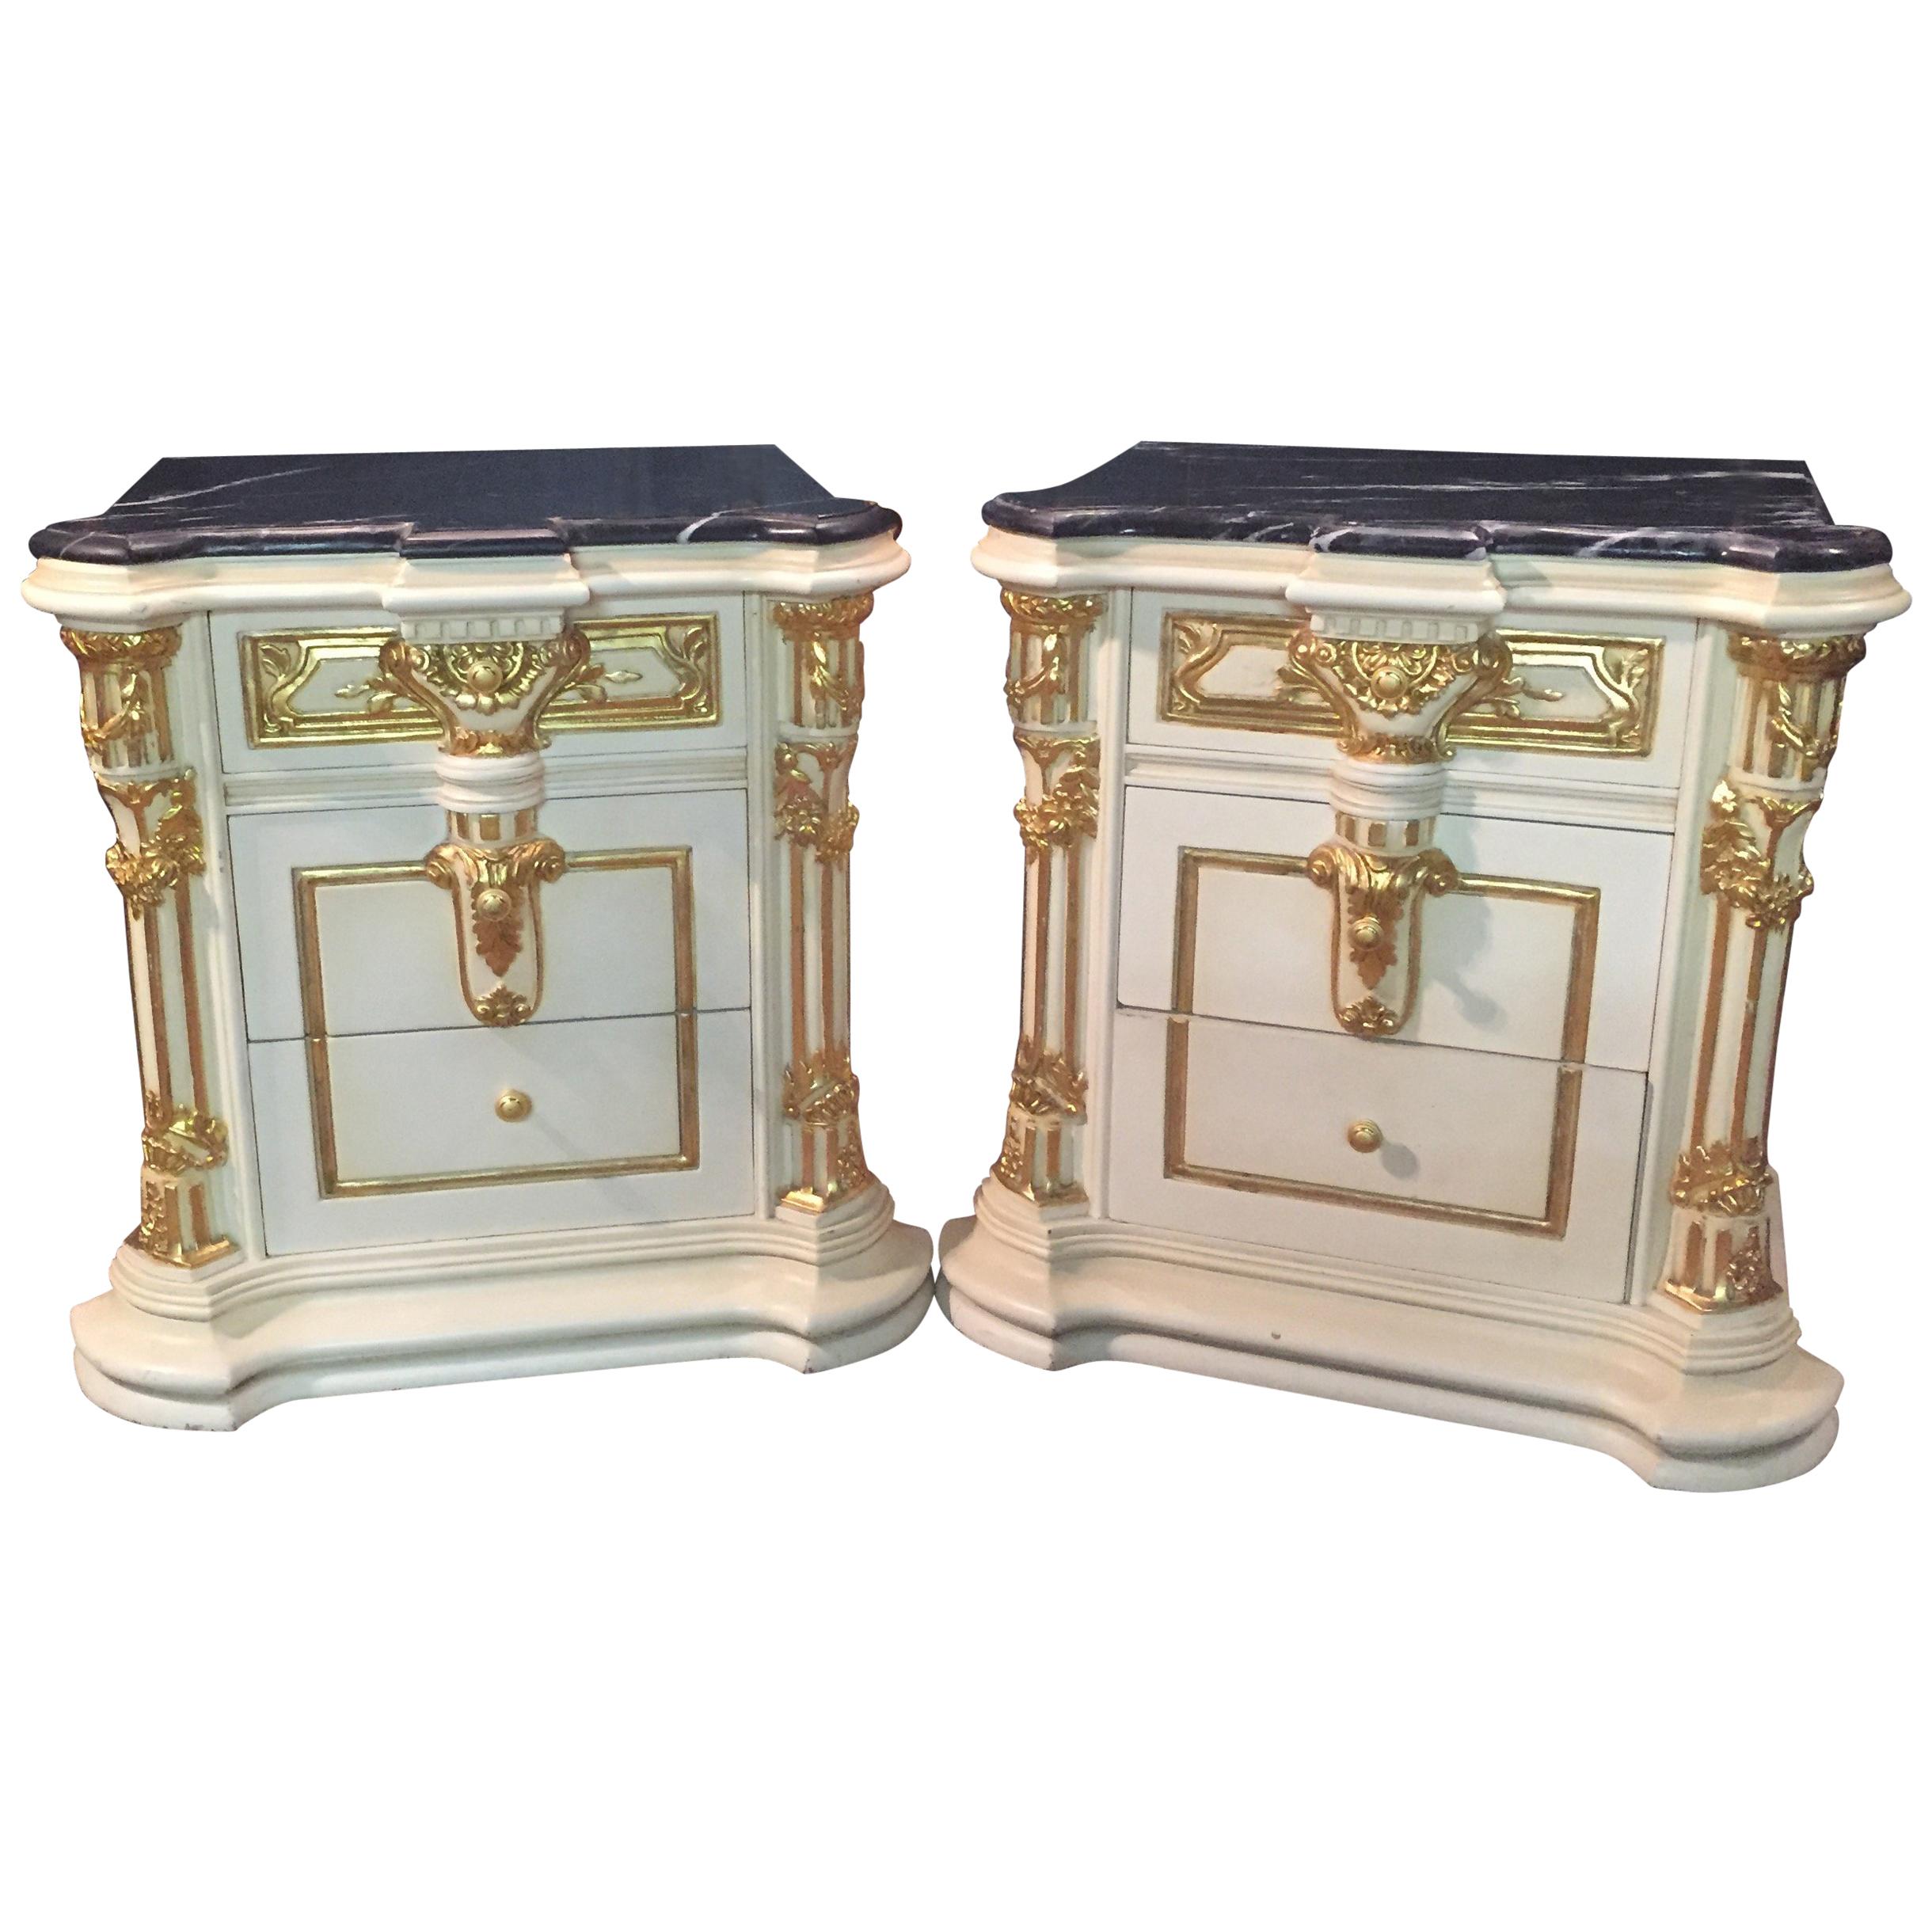 Majestic Baroque Bedside Commode in the Style of Louis XVI